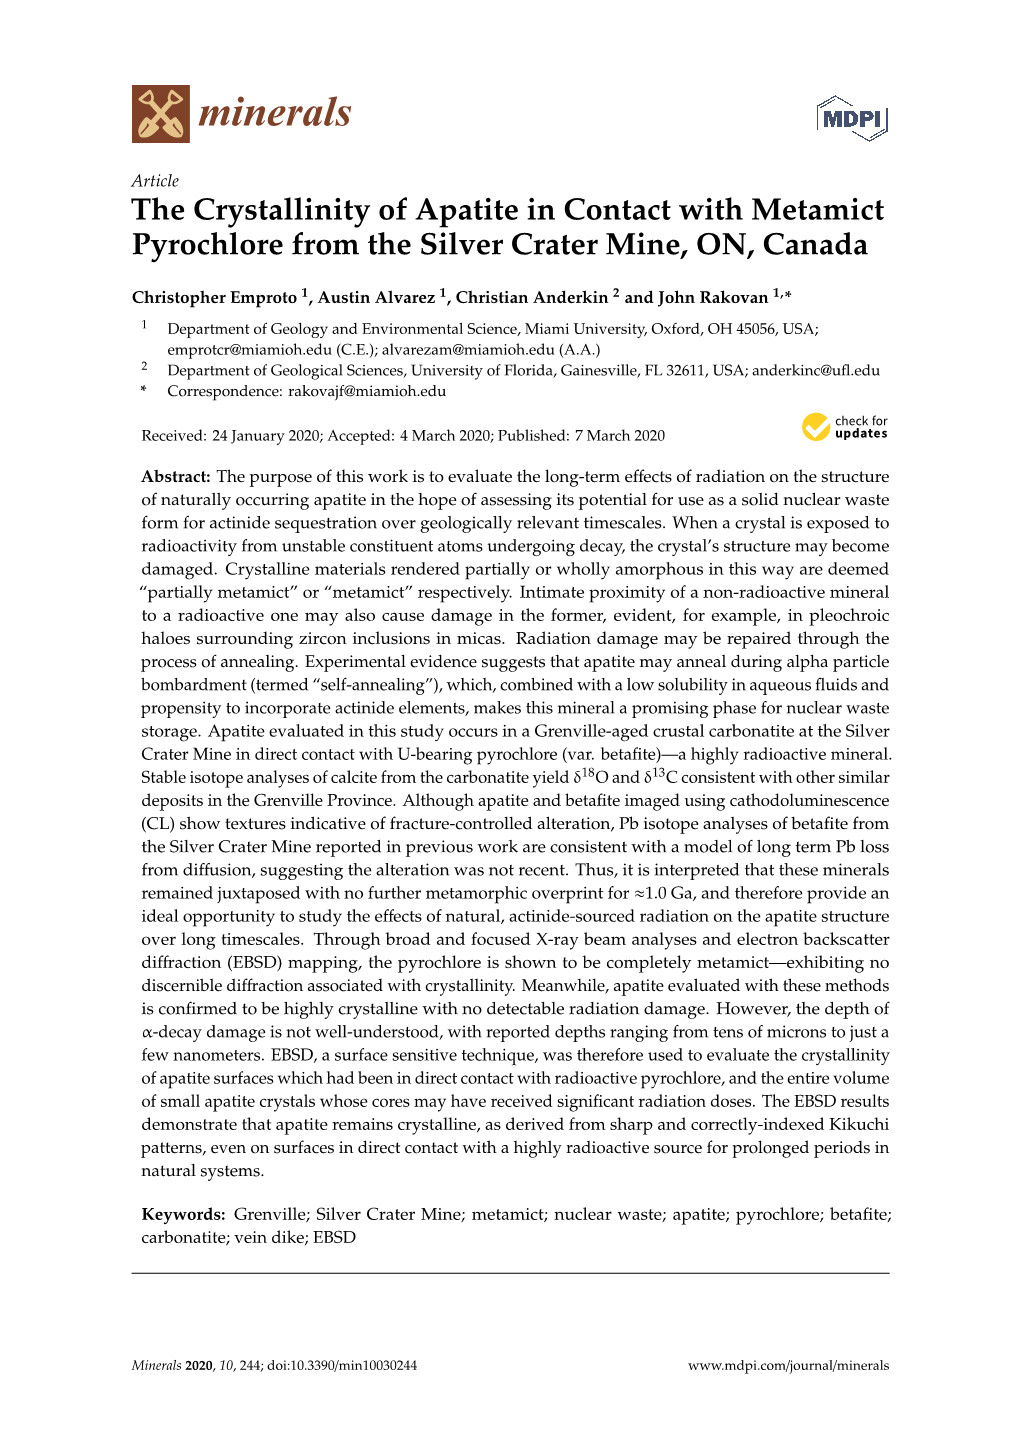 The Crystallinity of Apatite in Contact with Metamict Pyrochlore from the Silver Crater Mine, ON, Canada